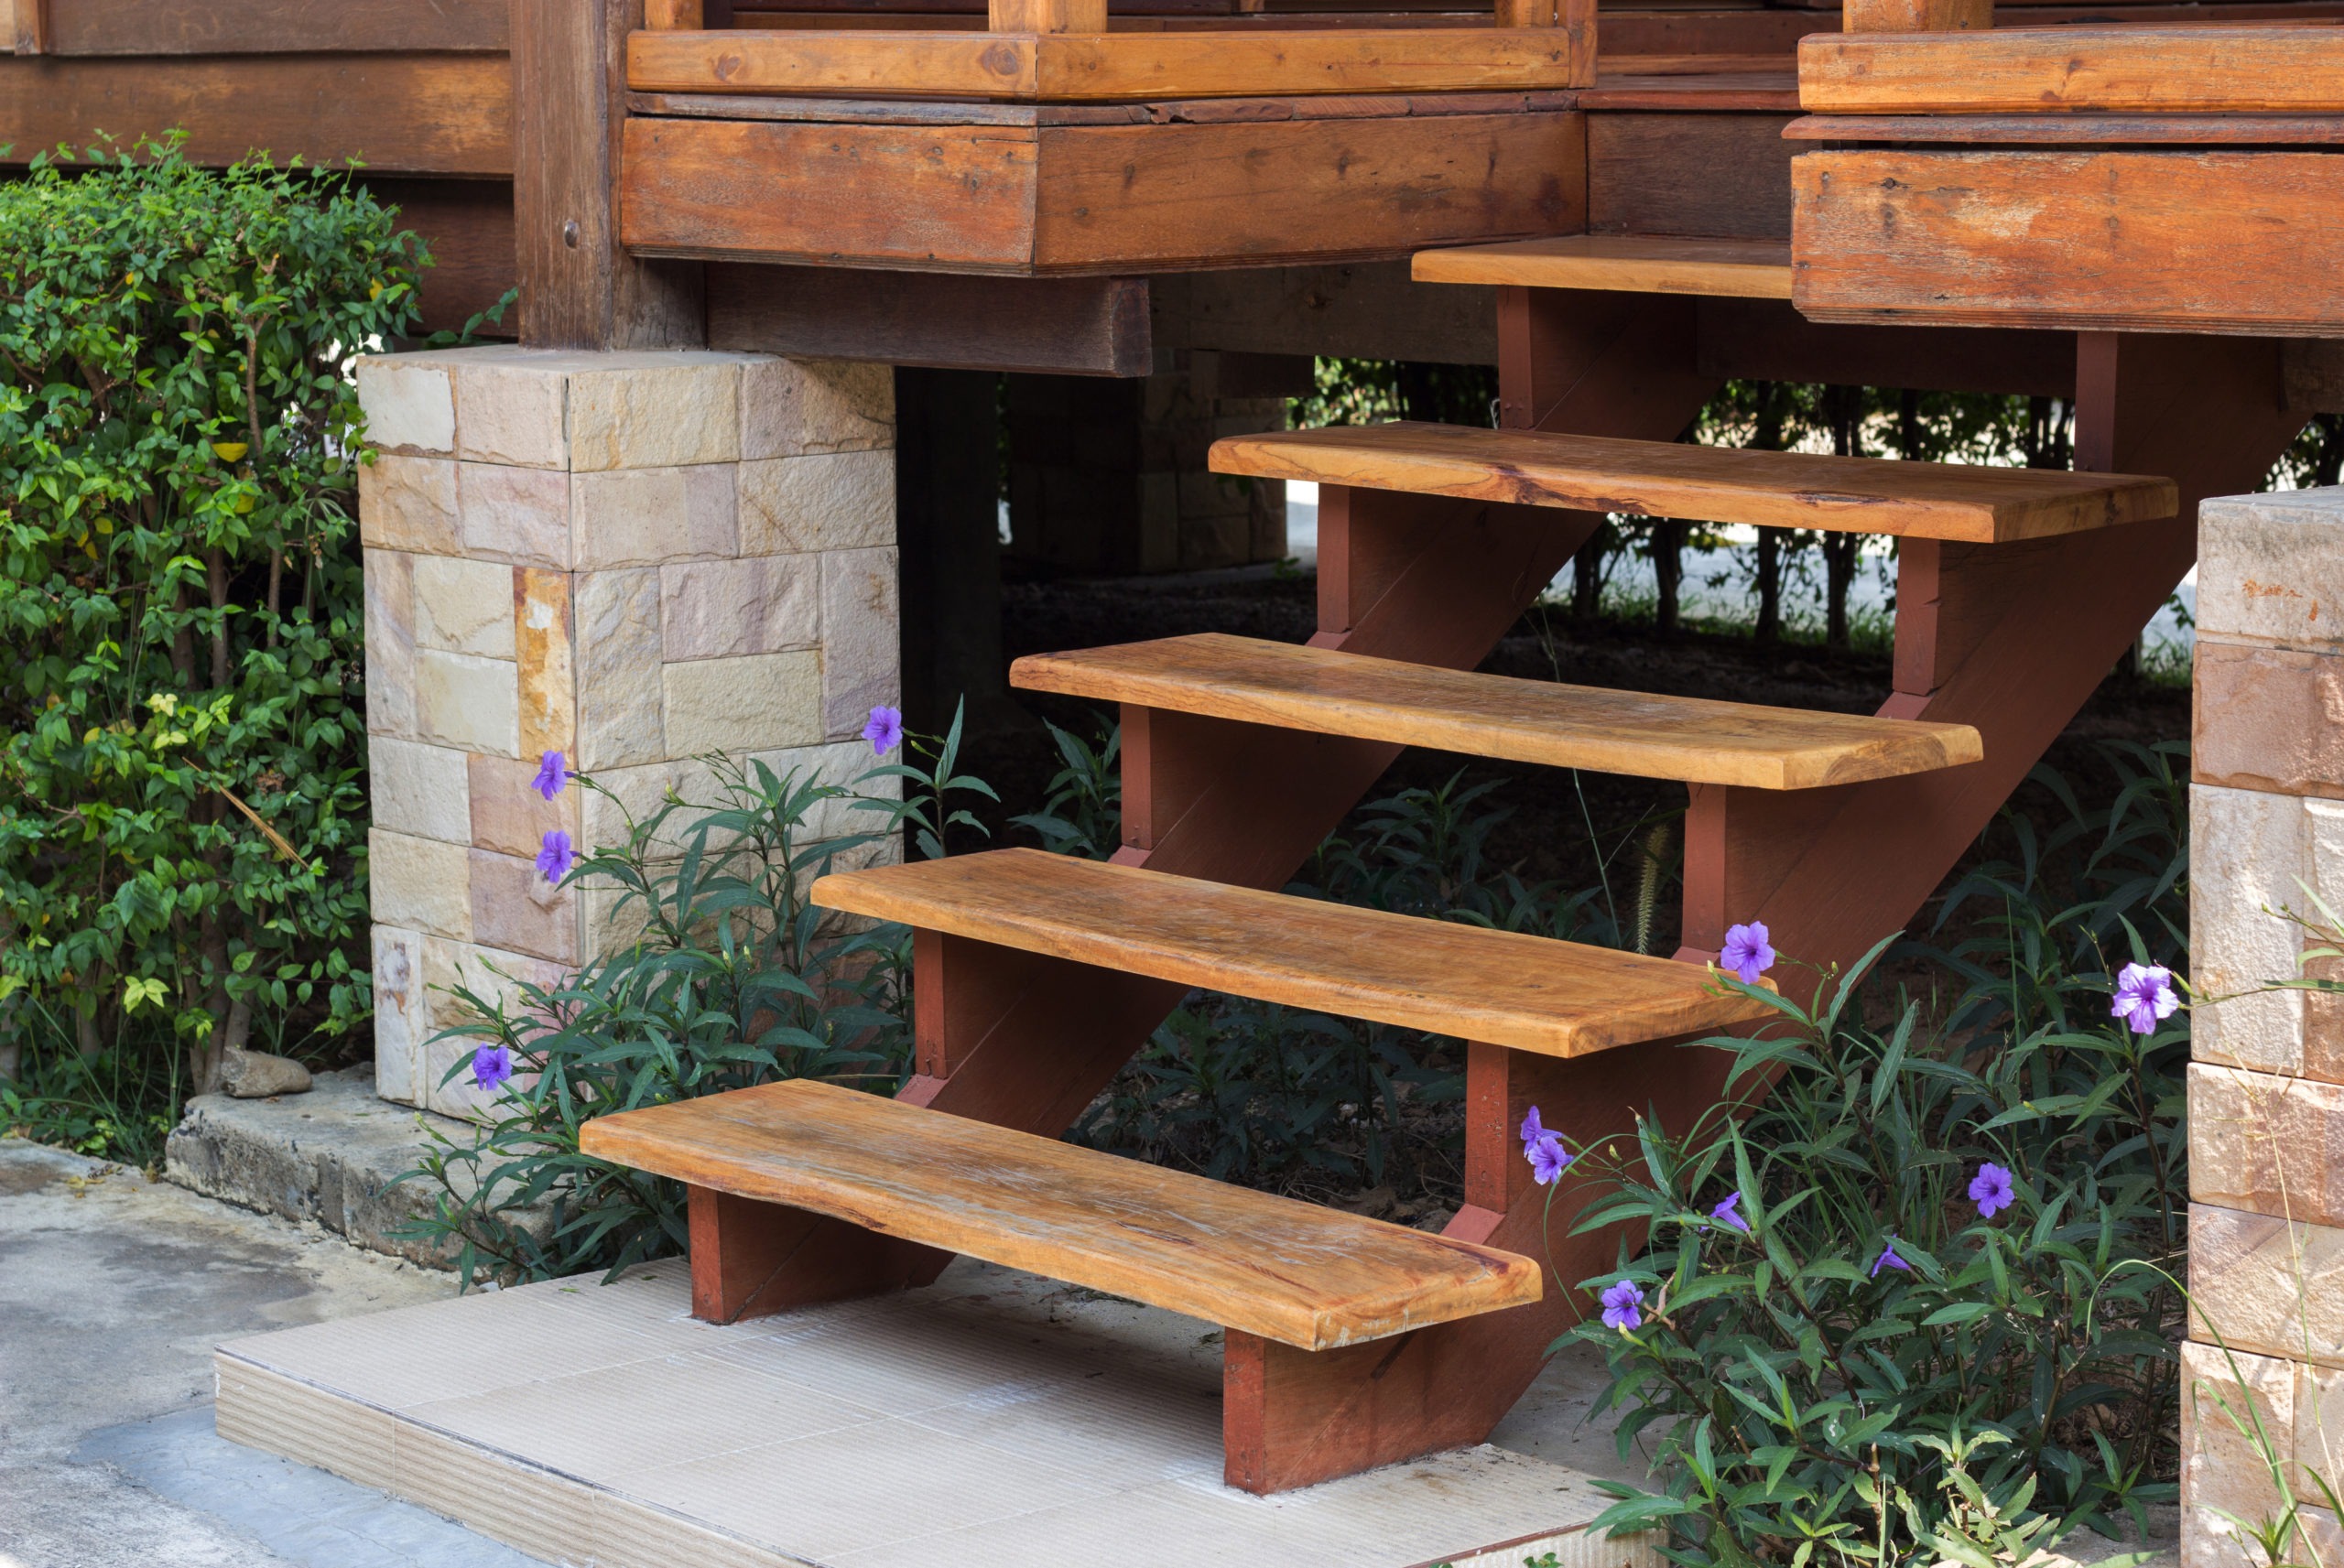 Exterior wooden stairs to house entrance